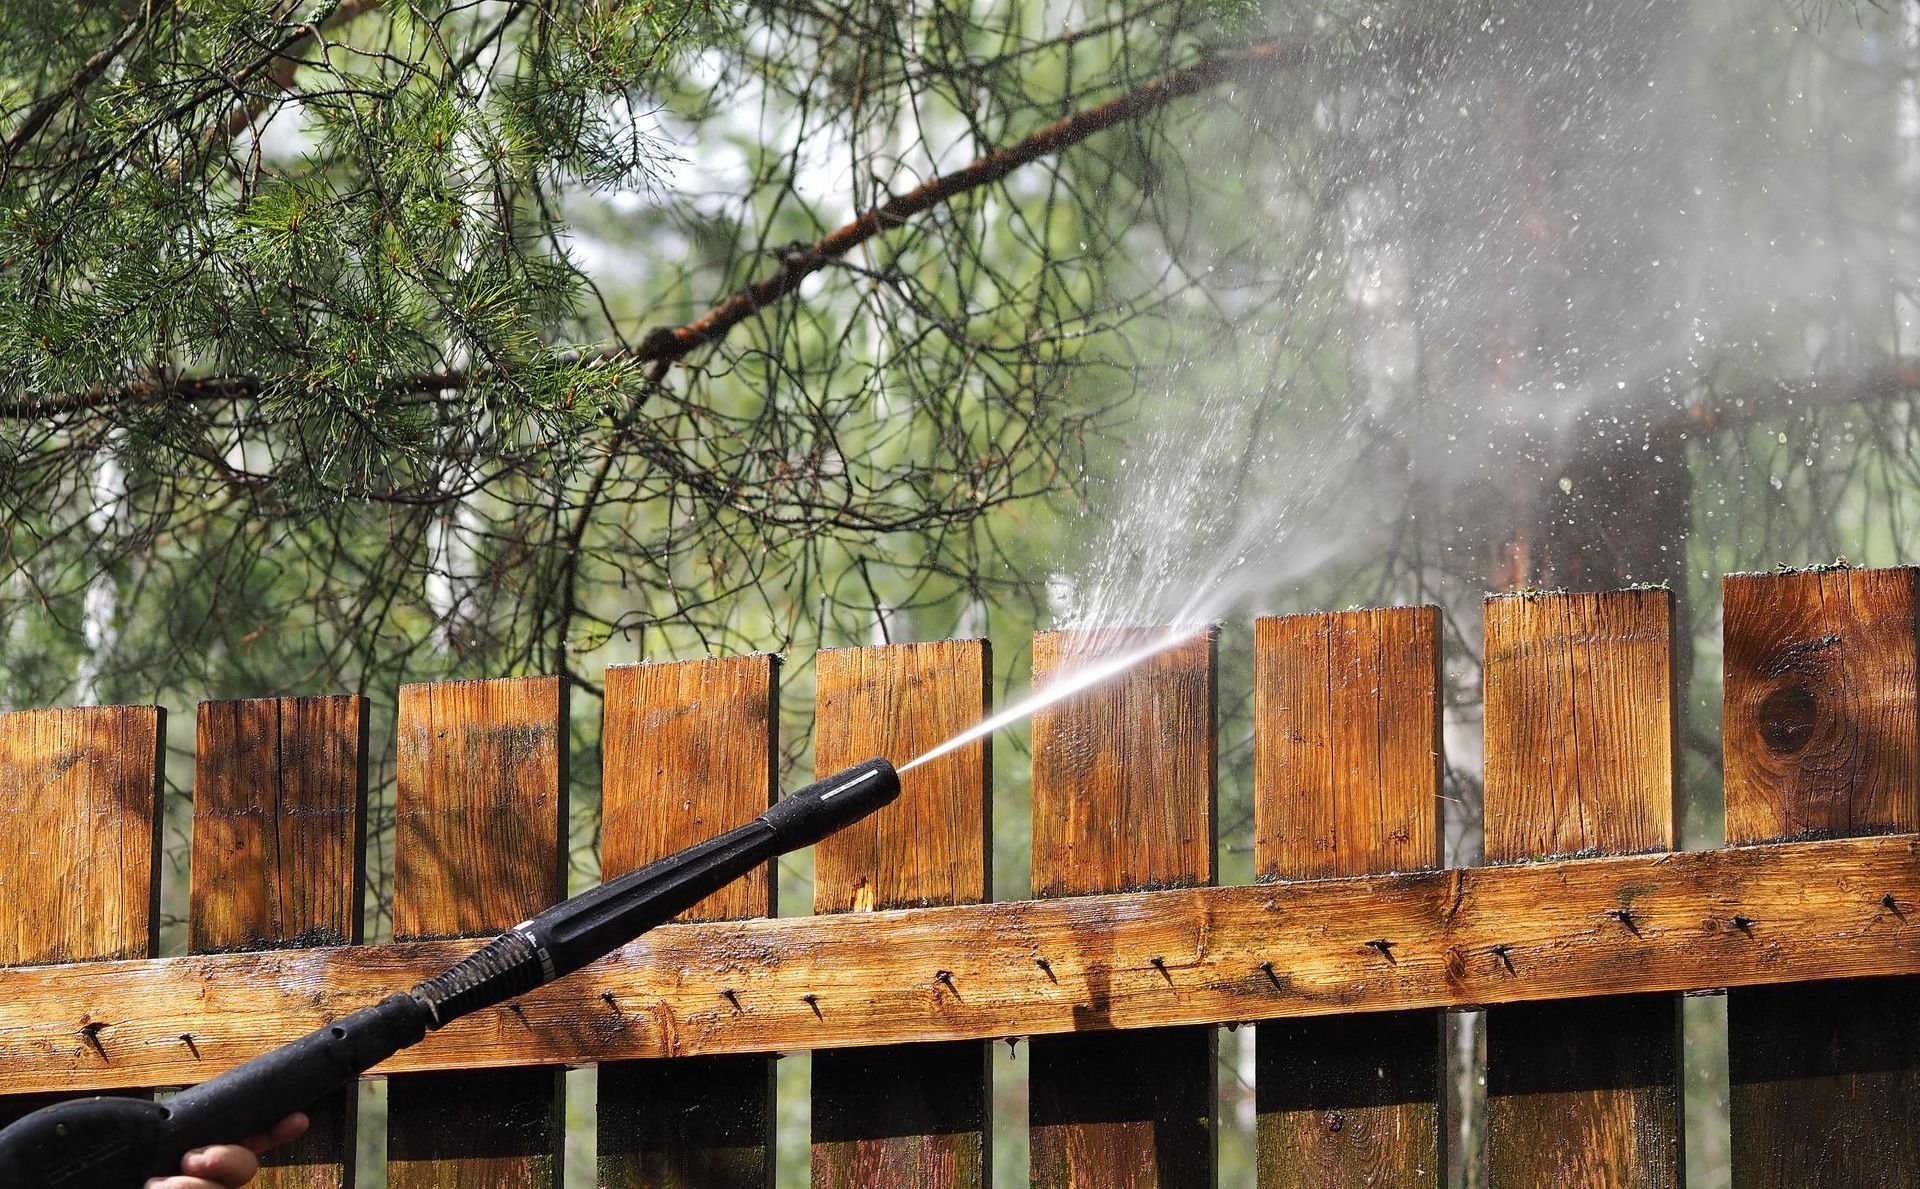 An individual using a high-pressure water sprayer to clean a wooden fence.